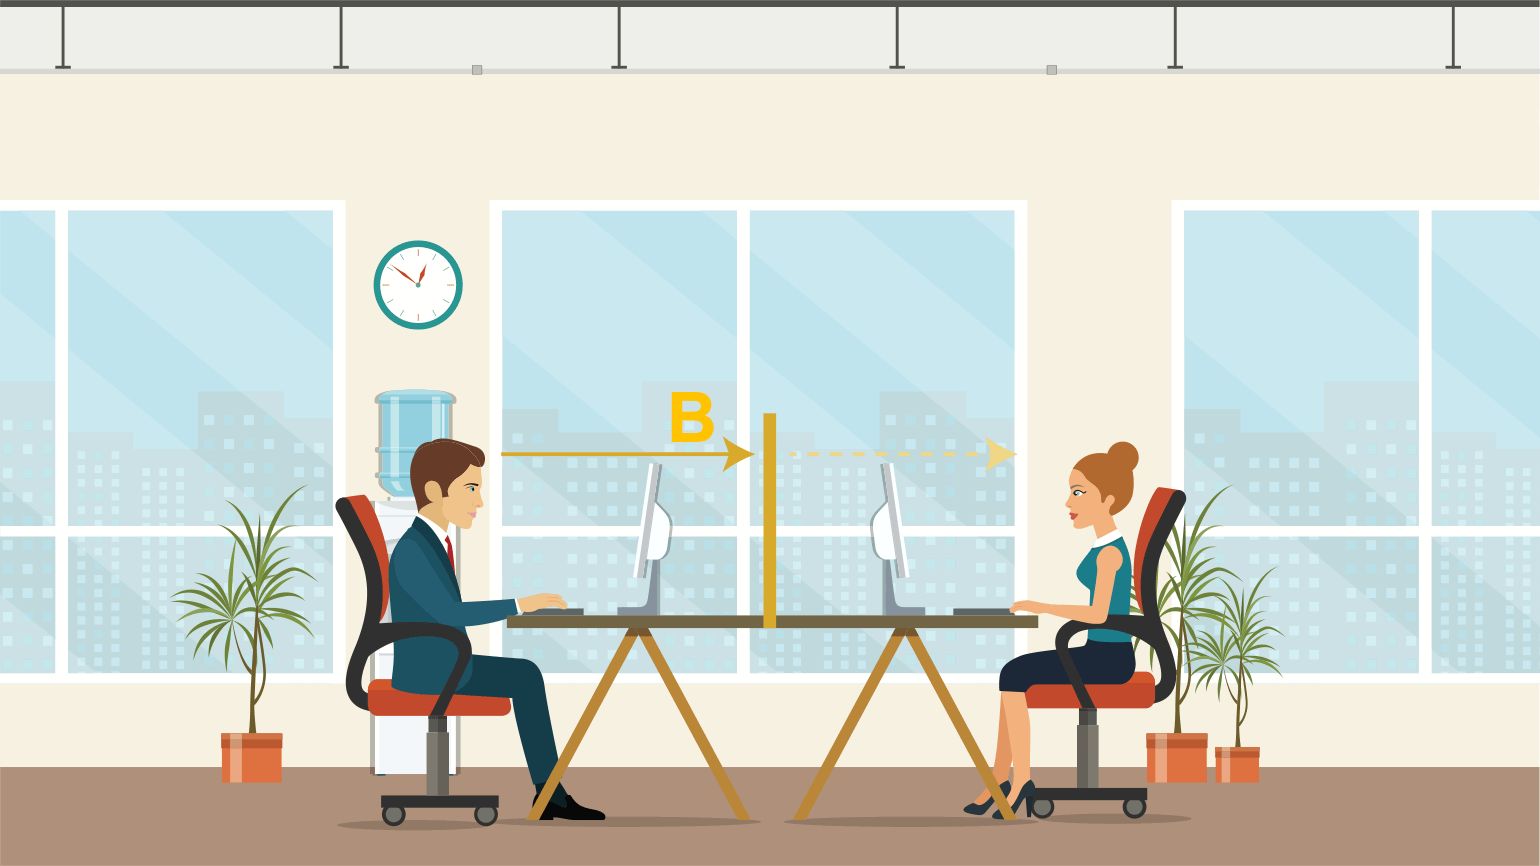 Illustration of coworkers sitting at facing desks, sound is blocked by a divider between the two desks